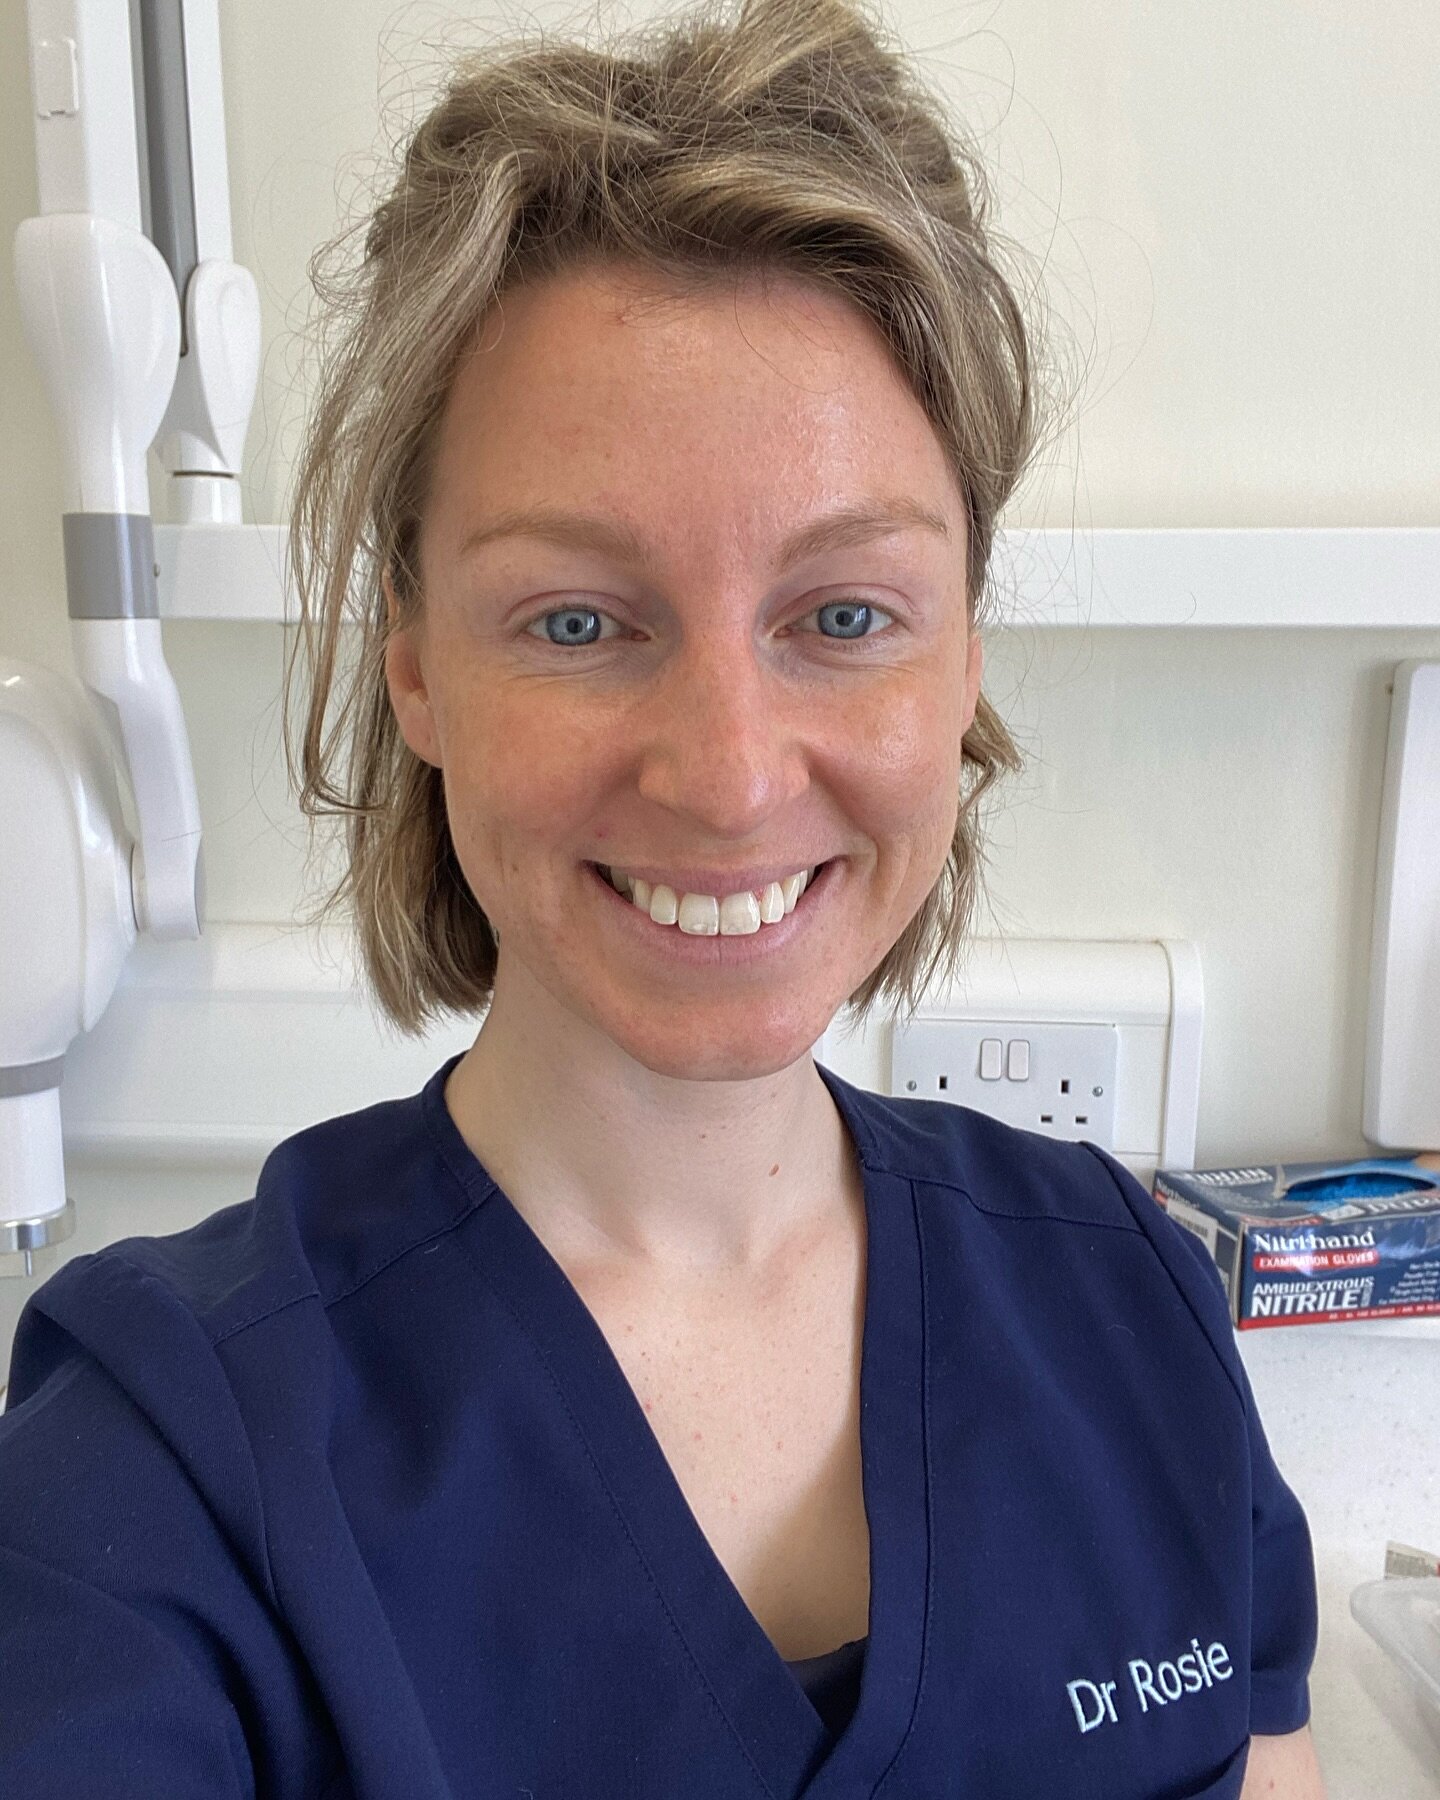 Dr Rosie welcomes you for a consultation! Why not book in for a chat where we can discuss your concerns, manage expectations and, if wanted, proceed with treatment in a safe and clinical setting?